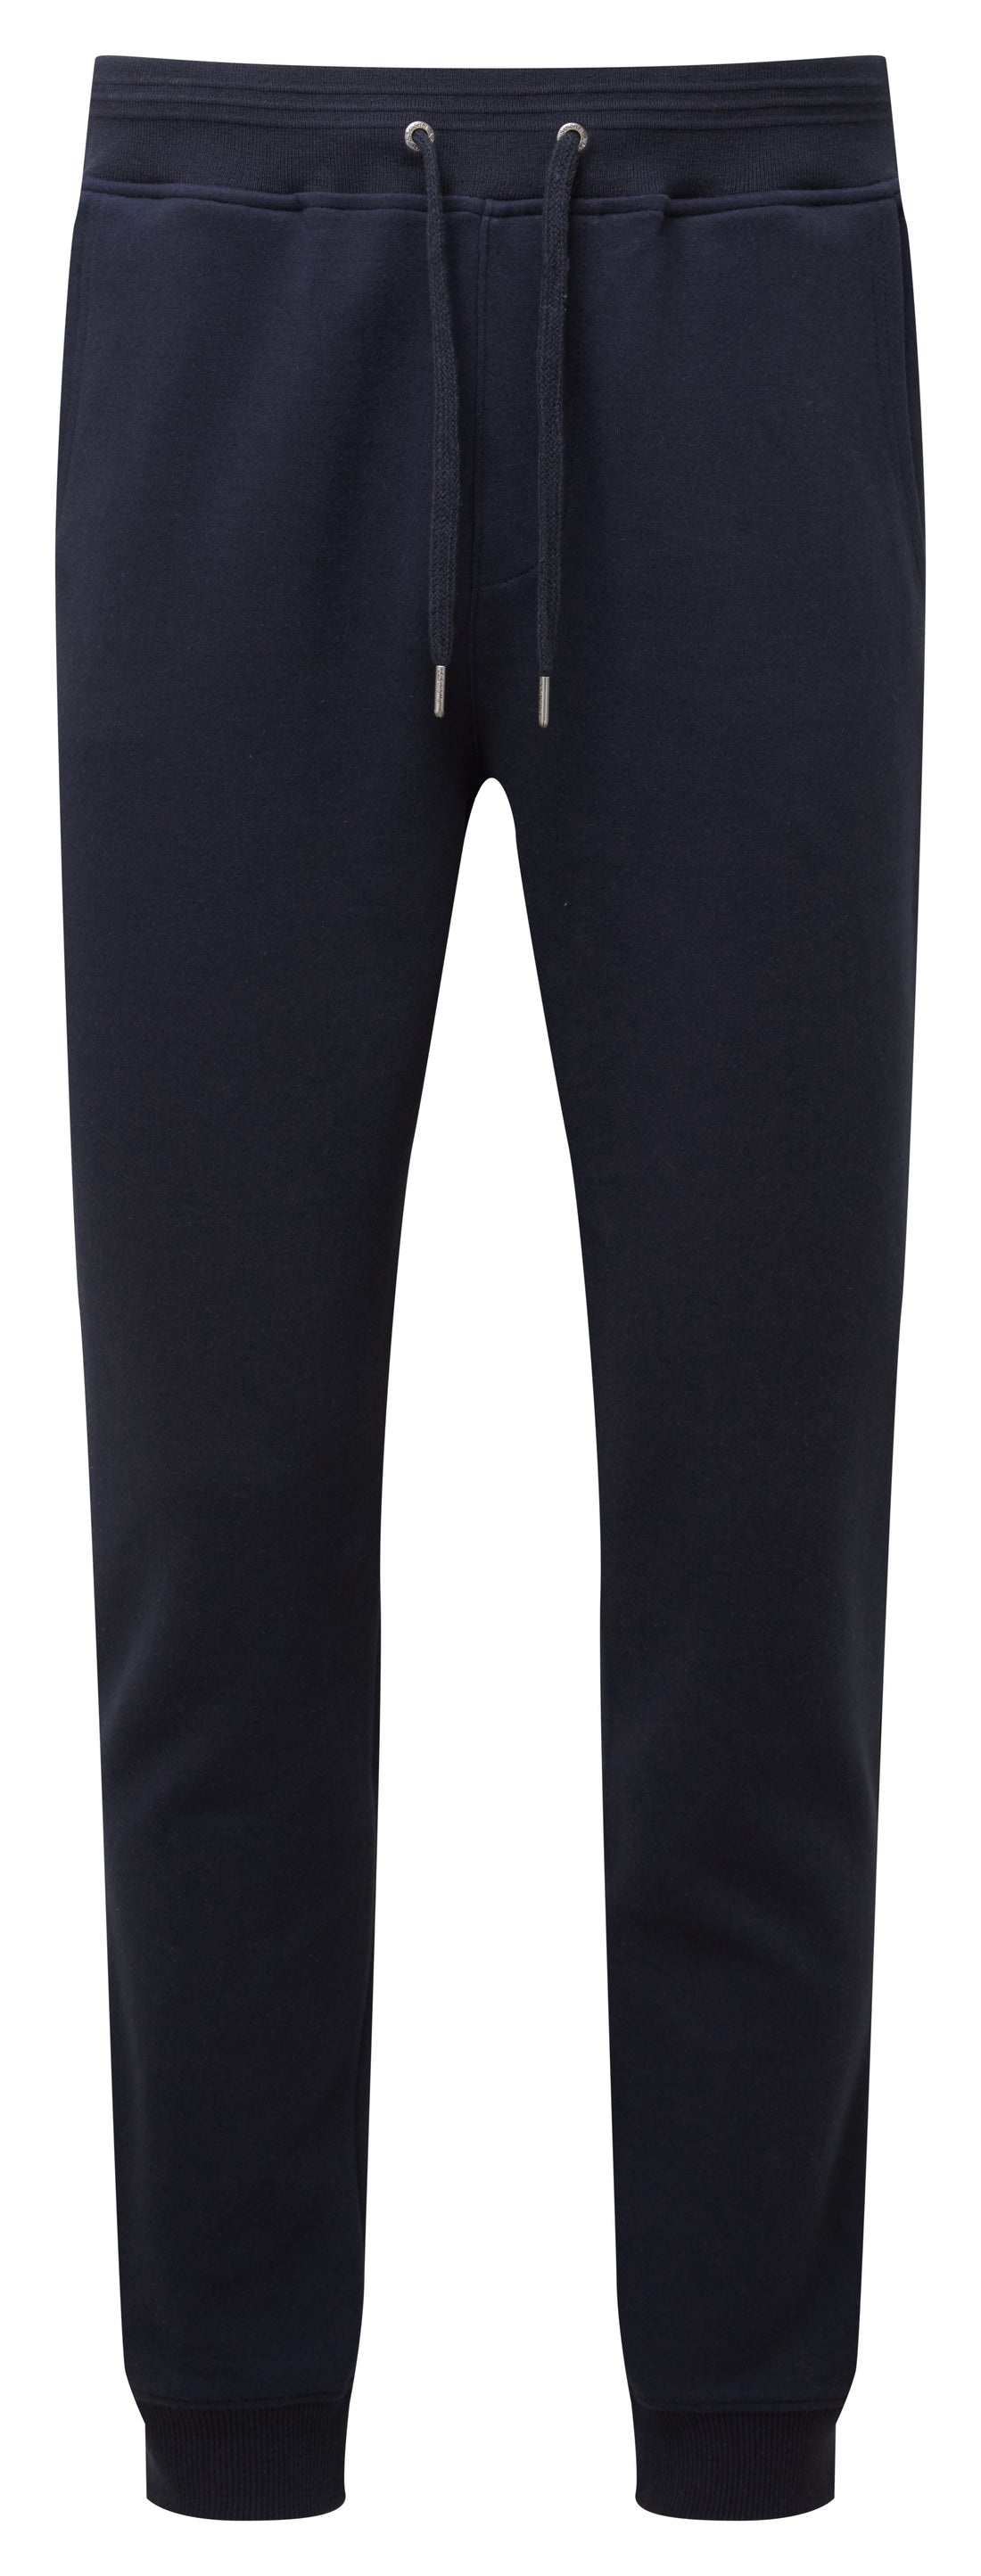 Falmouth Leisure Trouser - Navy